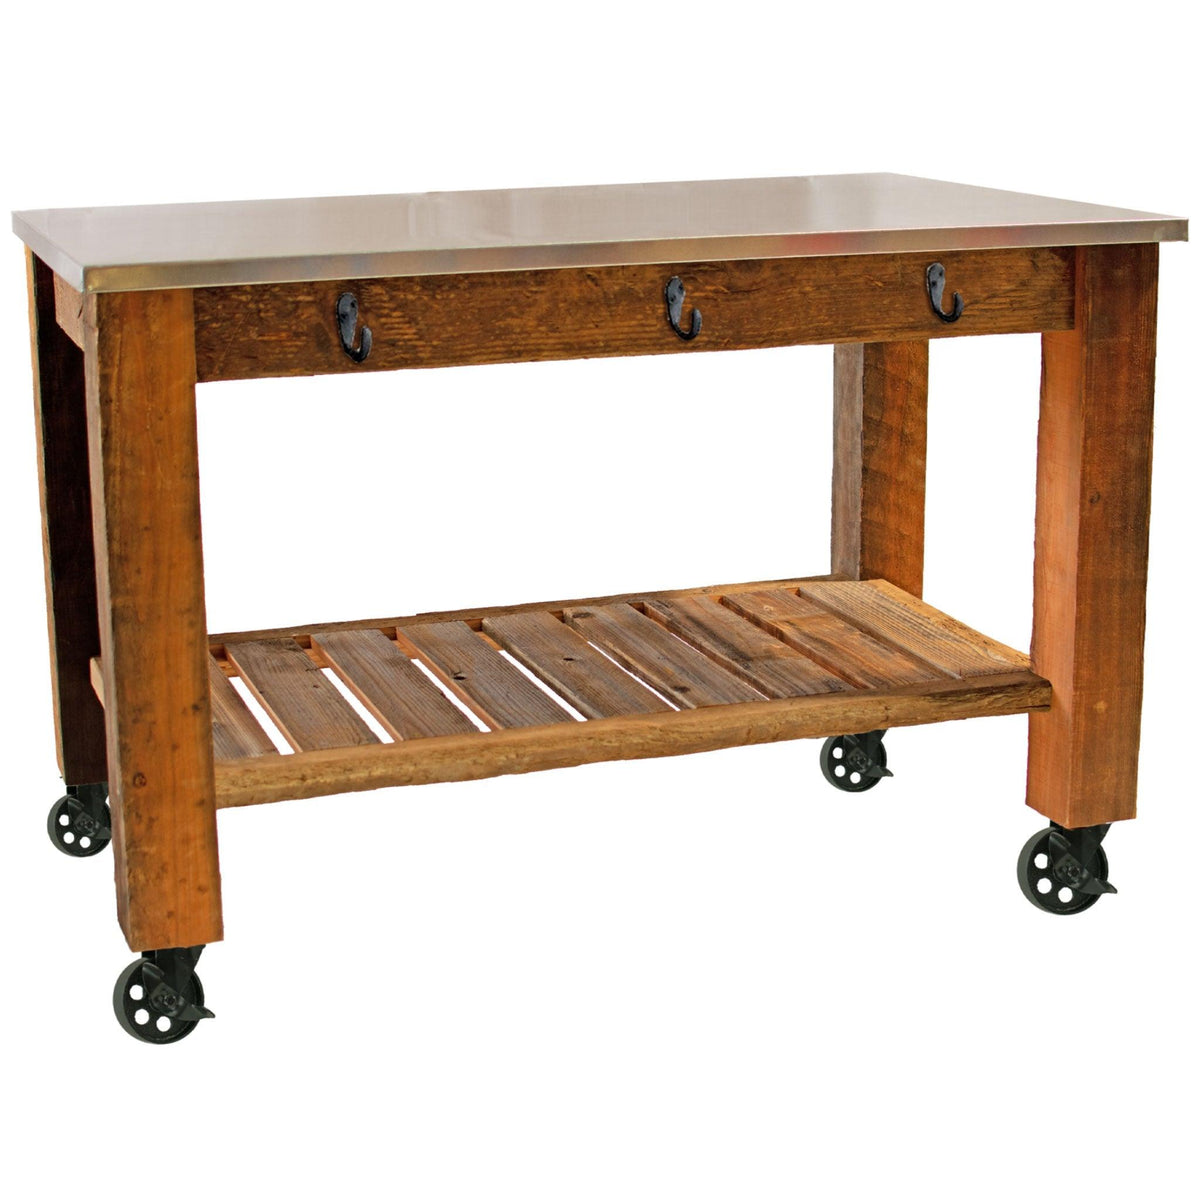 Lee Display's Redwood Potting Table Rolling Cart with 5in Black Casters with Hardware Included on sale now at leedisplay.com